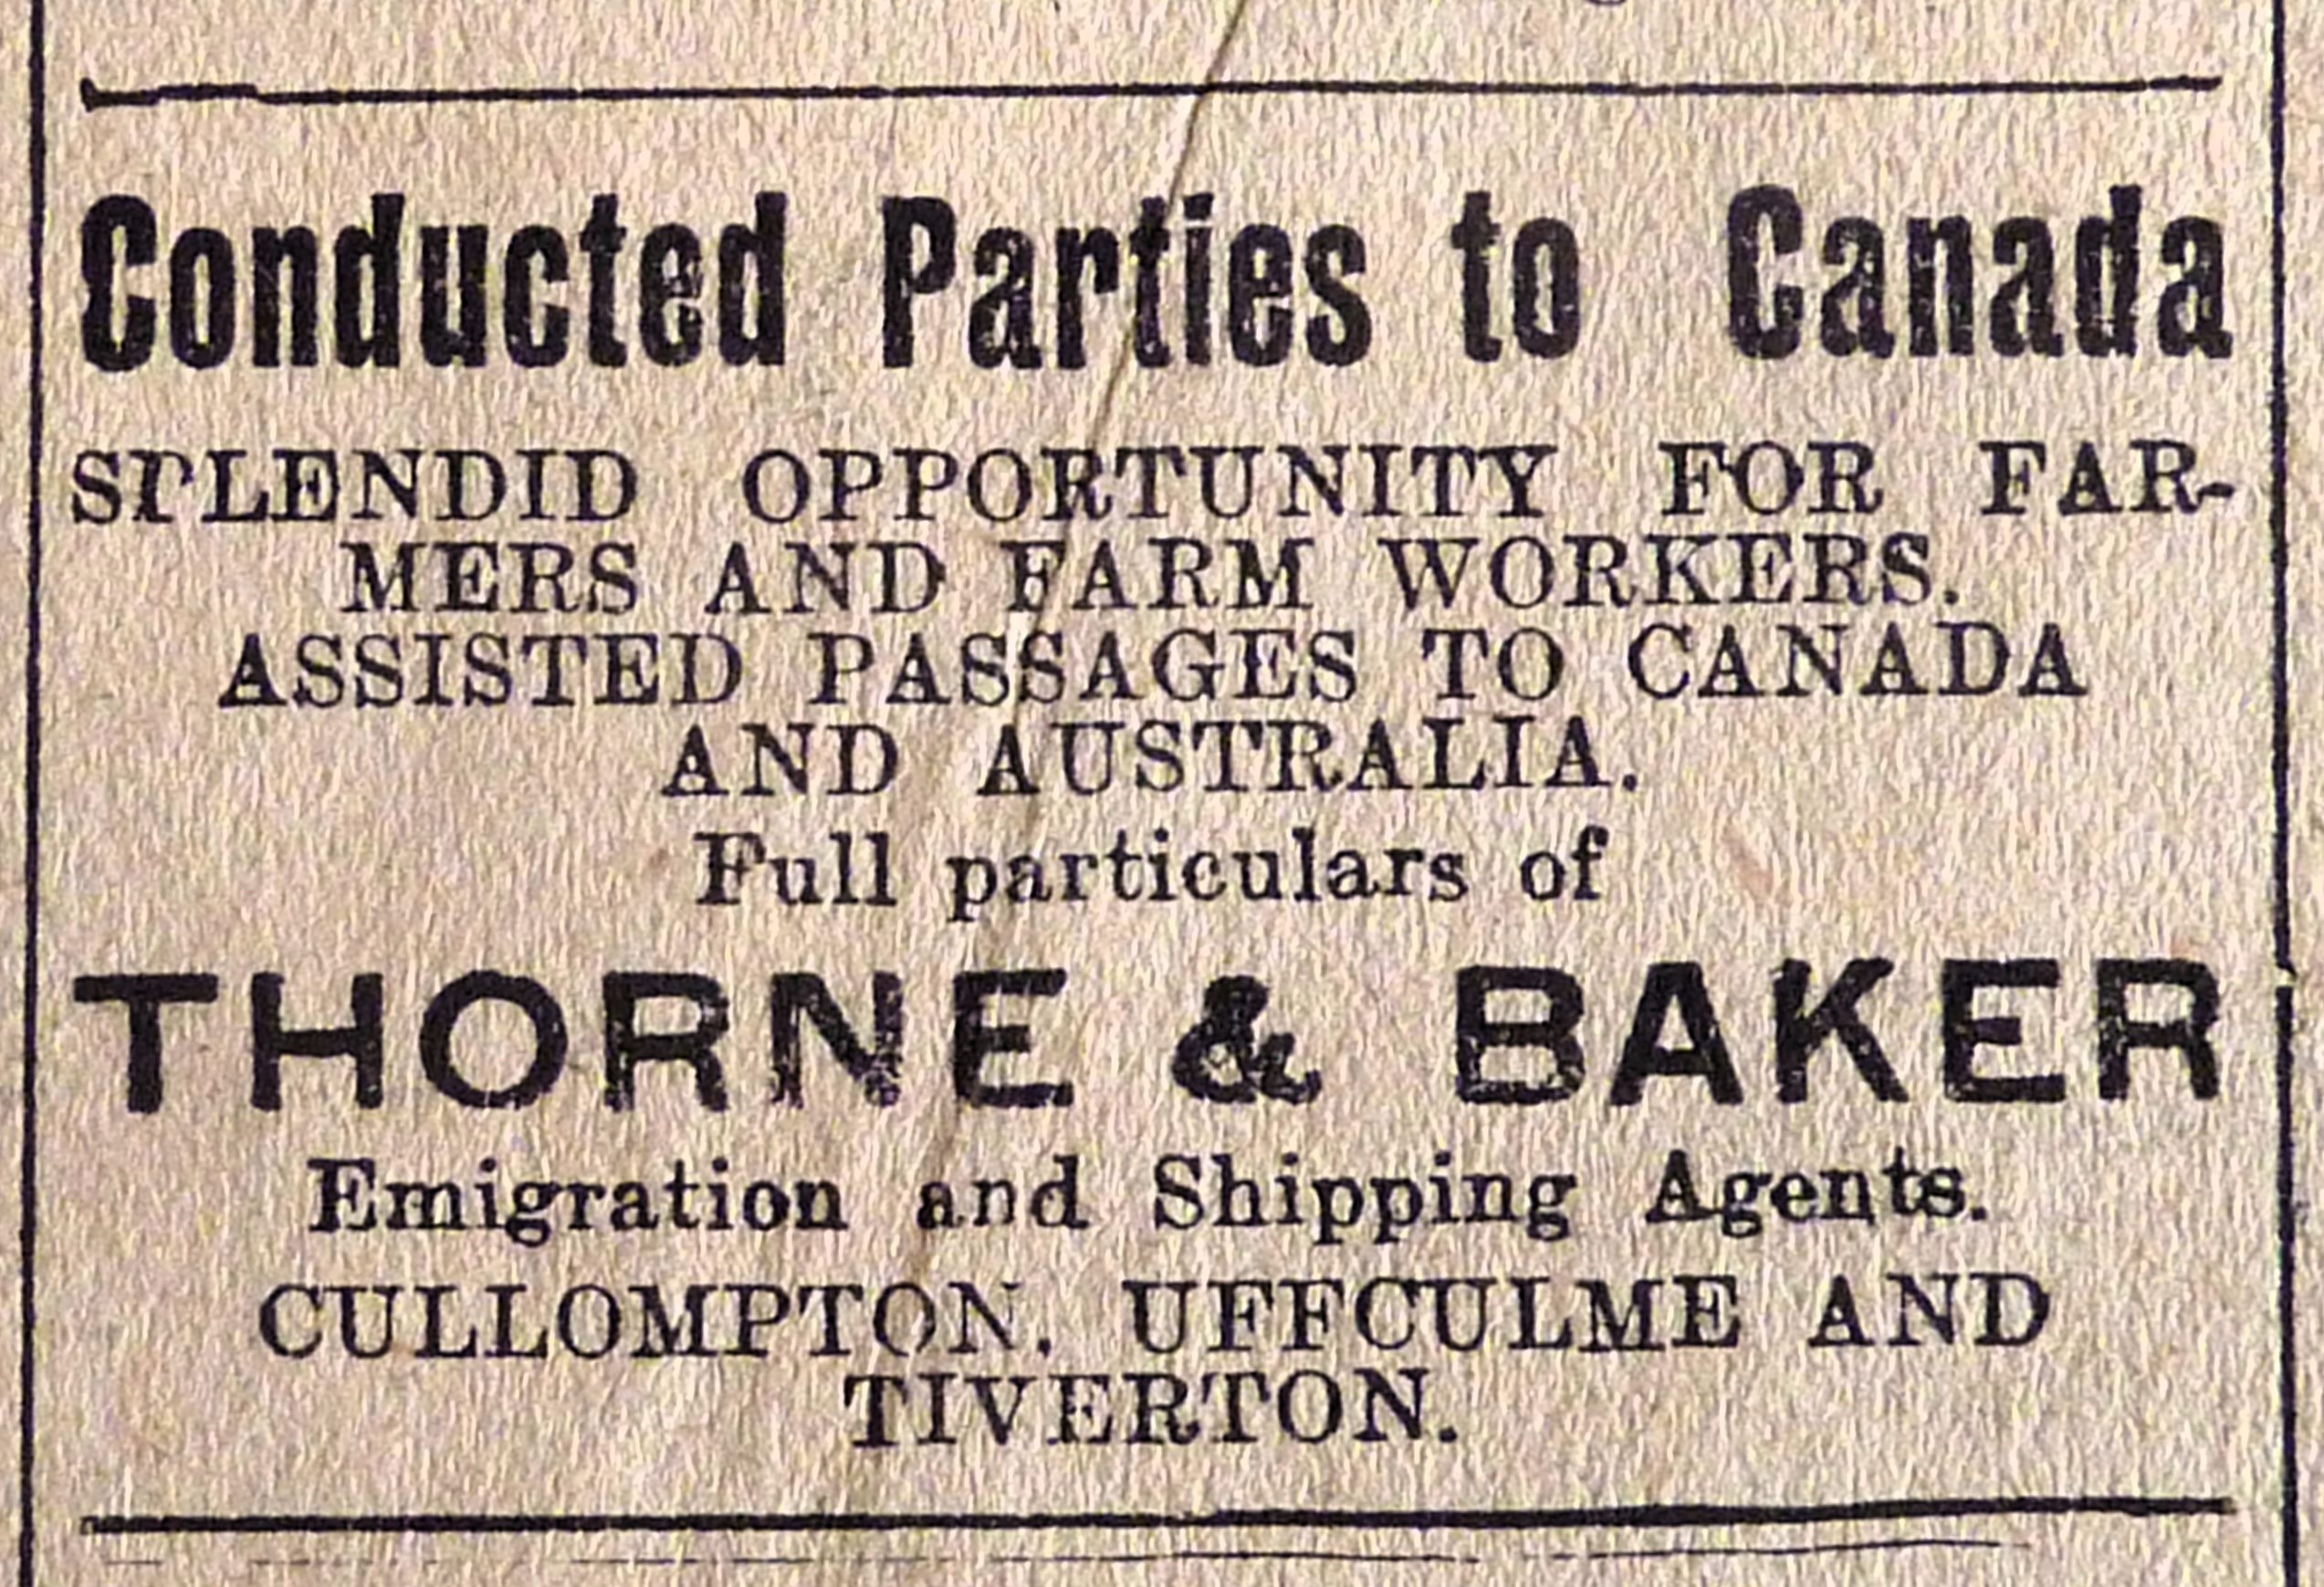 Newspaper cutting that reads 'Conducted Parties to Canada. Splendid opportunity for farmers and farm workers. Assisted passages to Canada and Australia. Full particulars of Thorne and Baker Emigrations and Shipping Agents. Cullompton, Uffculme and Tiverton.